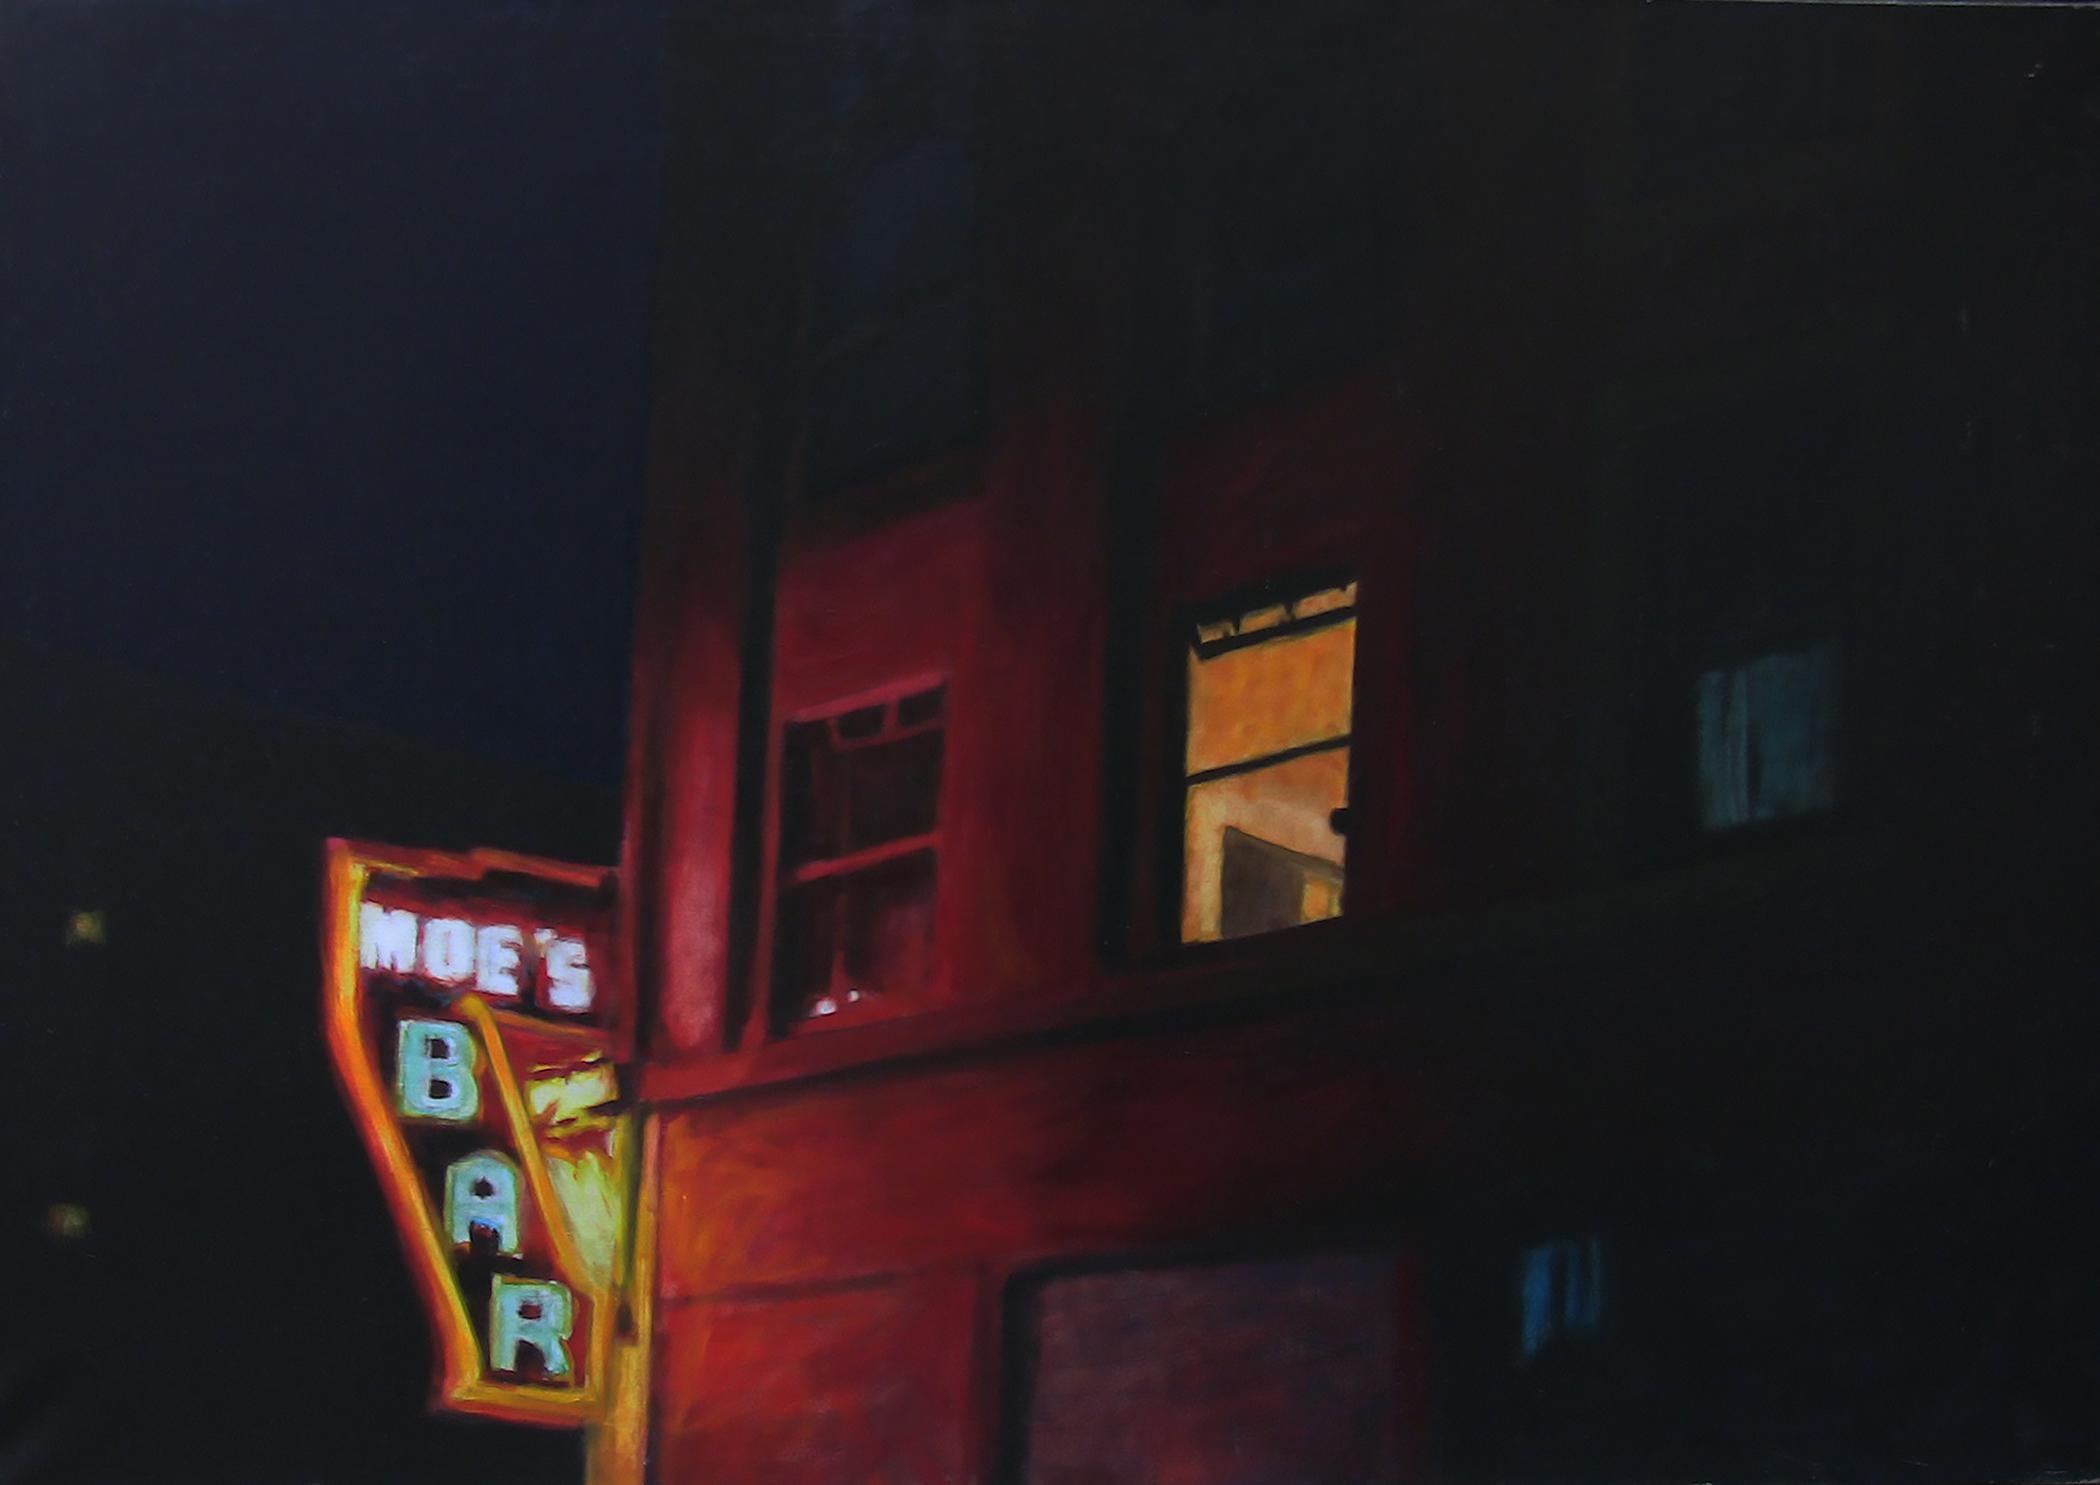 Night scene of Moe's Bar, a location in downtown Cleveland, Ohio. :: Painting :: Realism :: This piece comes with an official certificate of authenticity signed by the artist :: Ready to Hang: Yes :: Signed: Yes :: Signature Location: bottom right